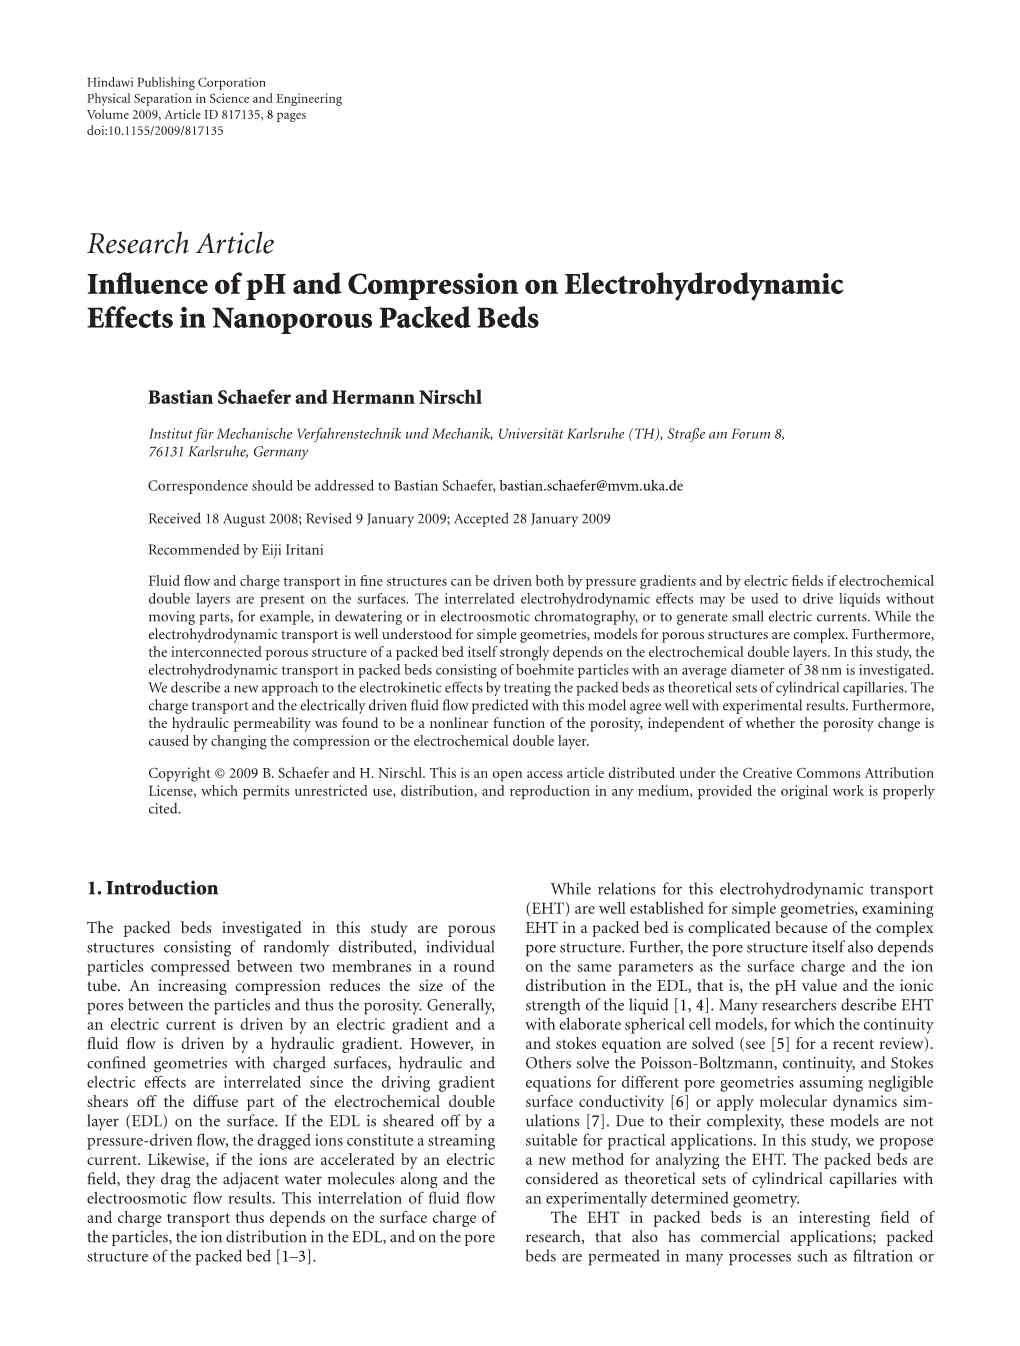 Influence of Ph and Compression on Electrohydrodynamic Effects in Nanoporous Packed Beds